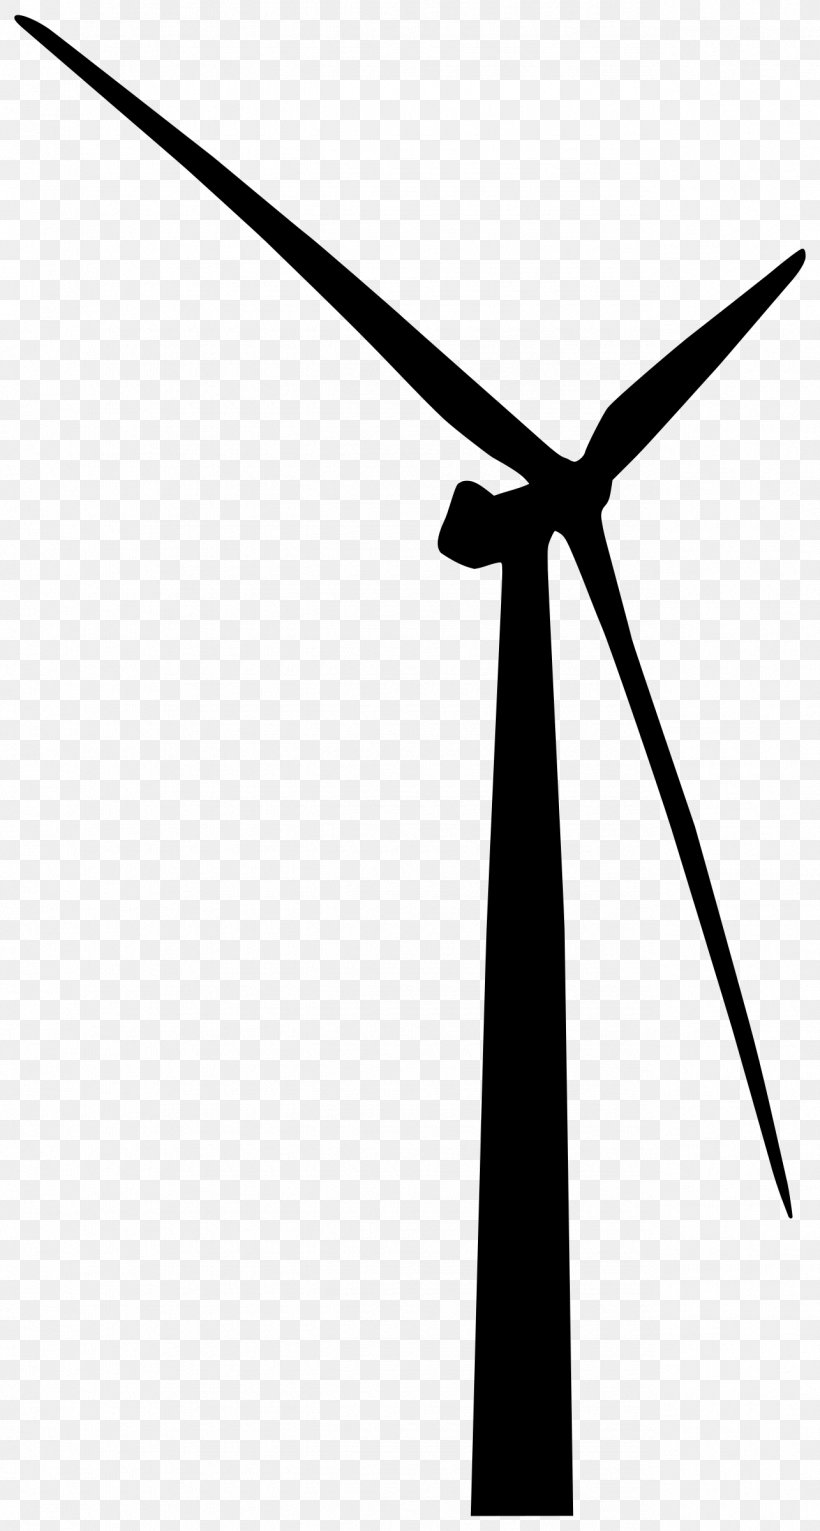 Wind Farm Wind Turbine Clip Art, PNG, 1285x2400px, Wind Farm, Black And White, Electricity, Energy, Machine Download Free